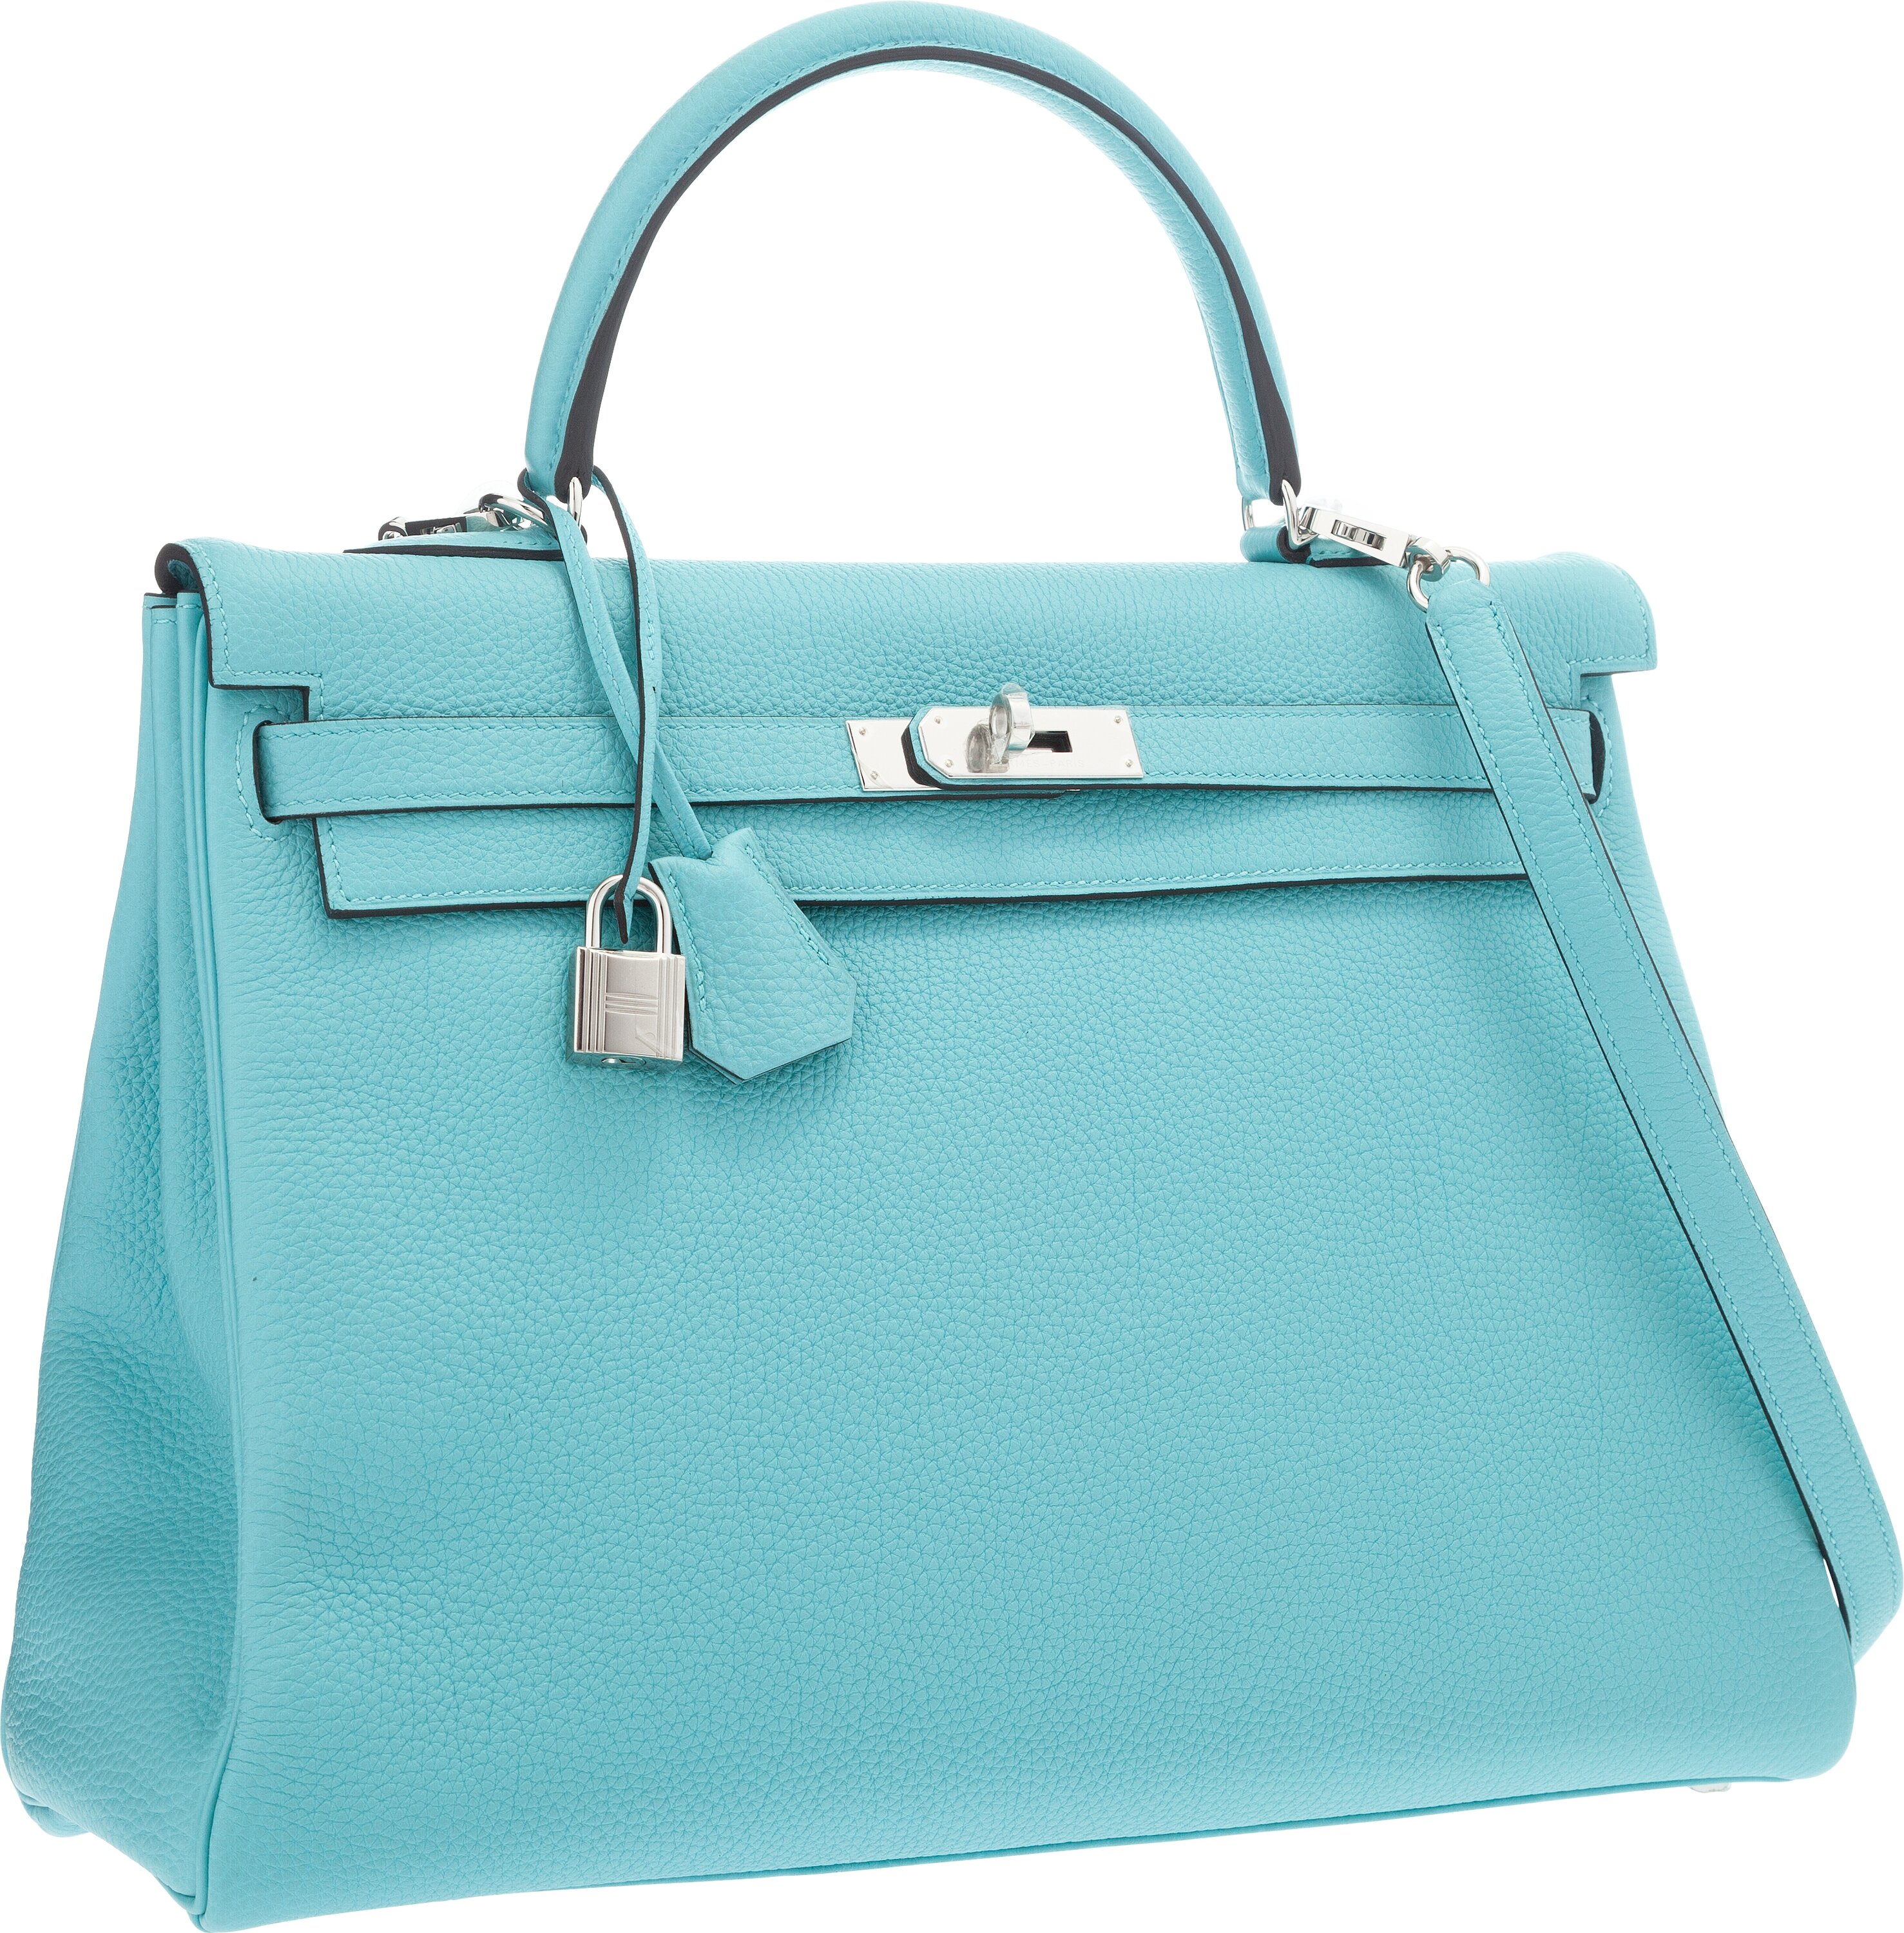 Hermes 35cm Blue Atoll Togo Leather Retourne Kelly Bag with | Lot ...